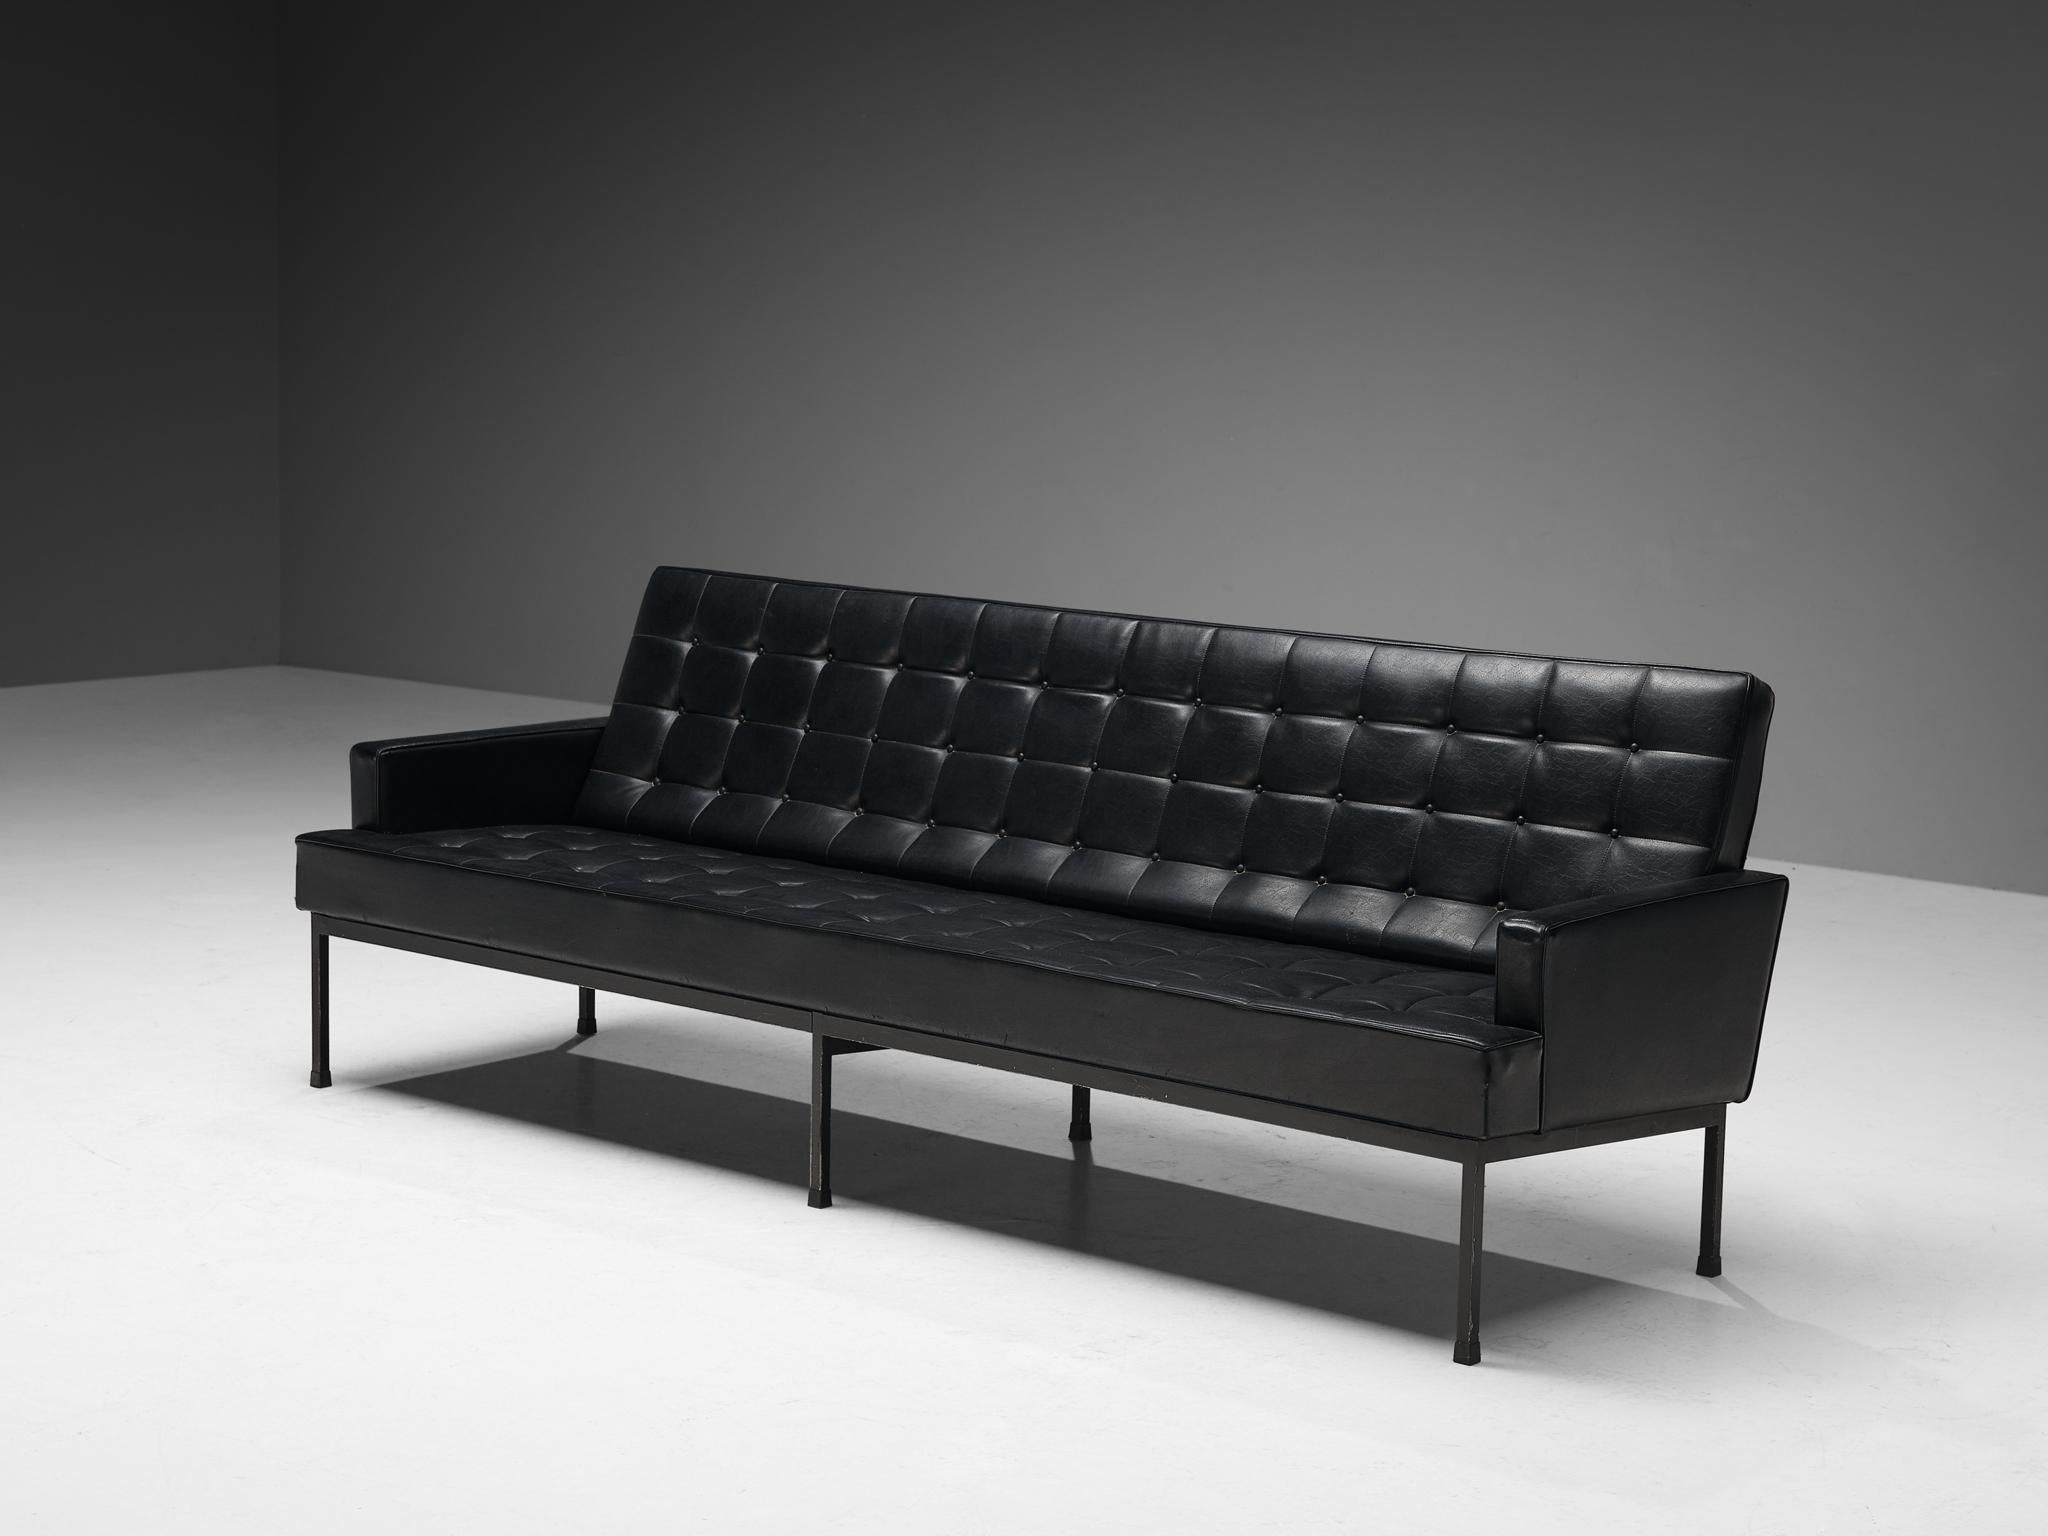 Sofa, leatherette, lacquered metal, Northern Europe, 1970s

The design is characterized by a solid construction based on sharp lines and geometrical shapes that are noticeable in the body of the seat and the black lacquered metal base, underlining